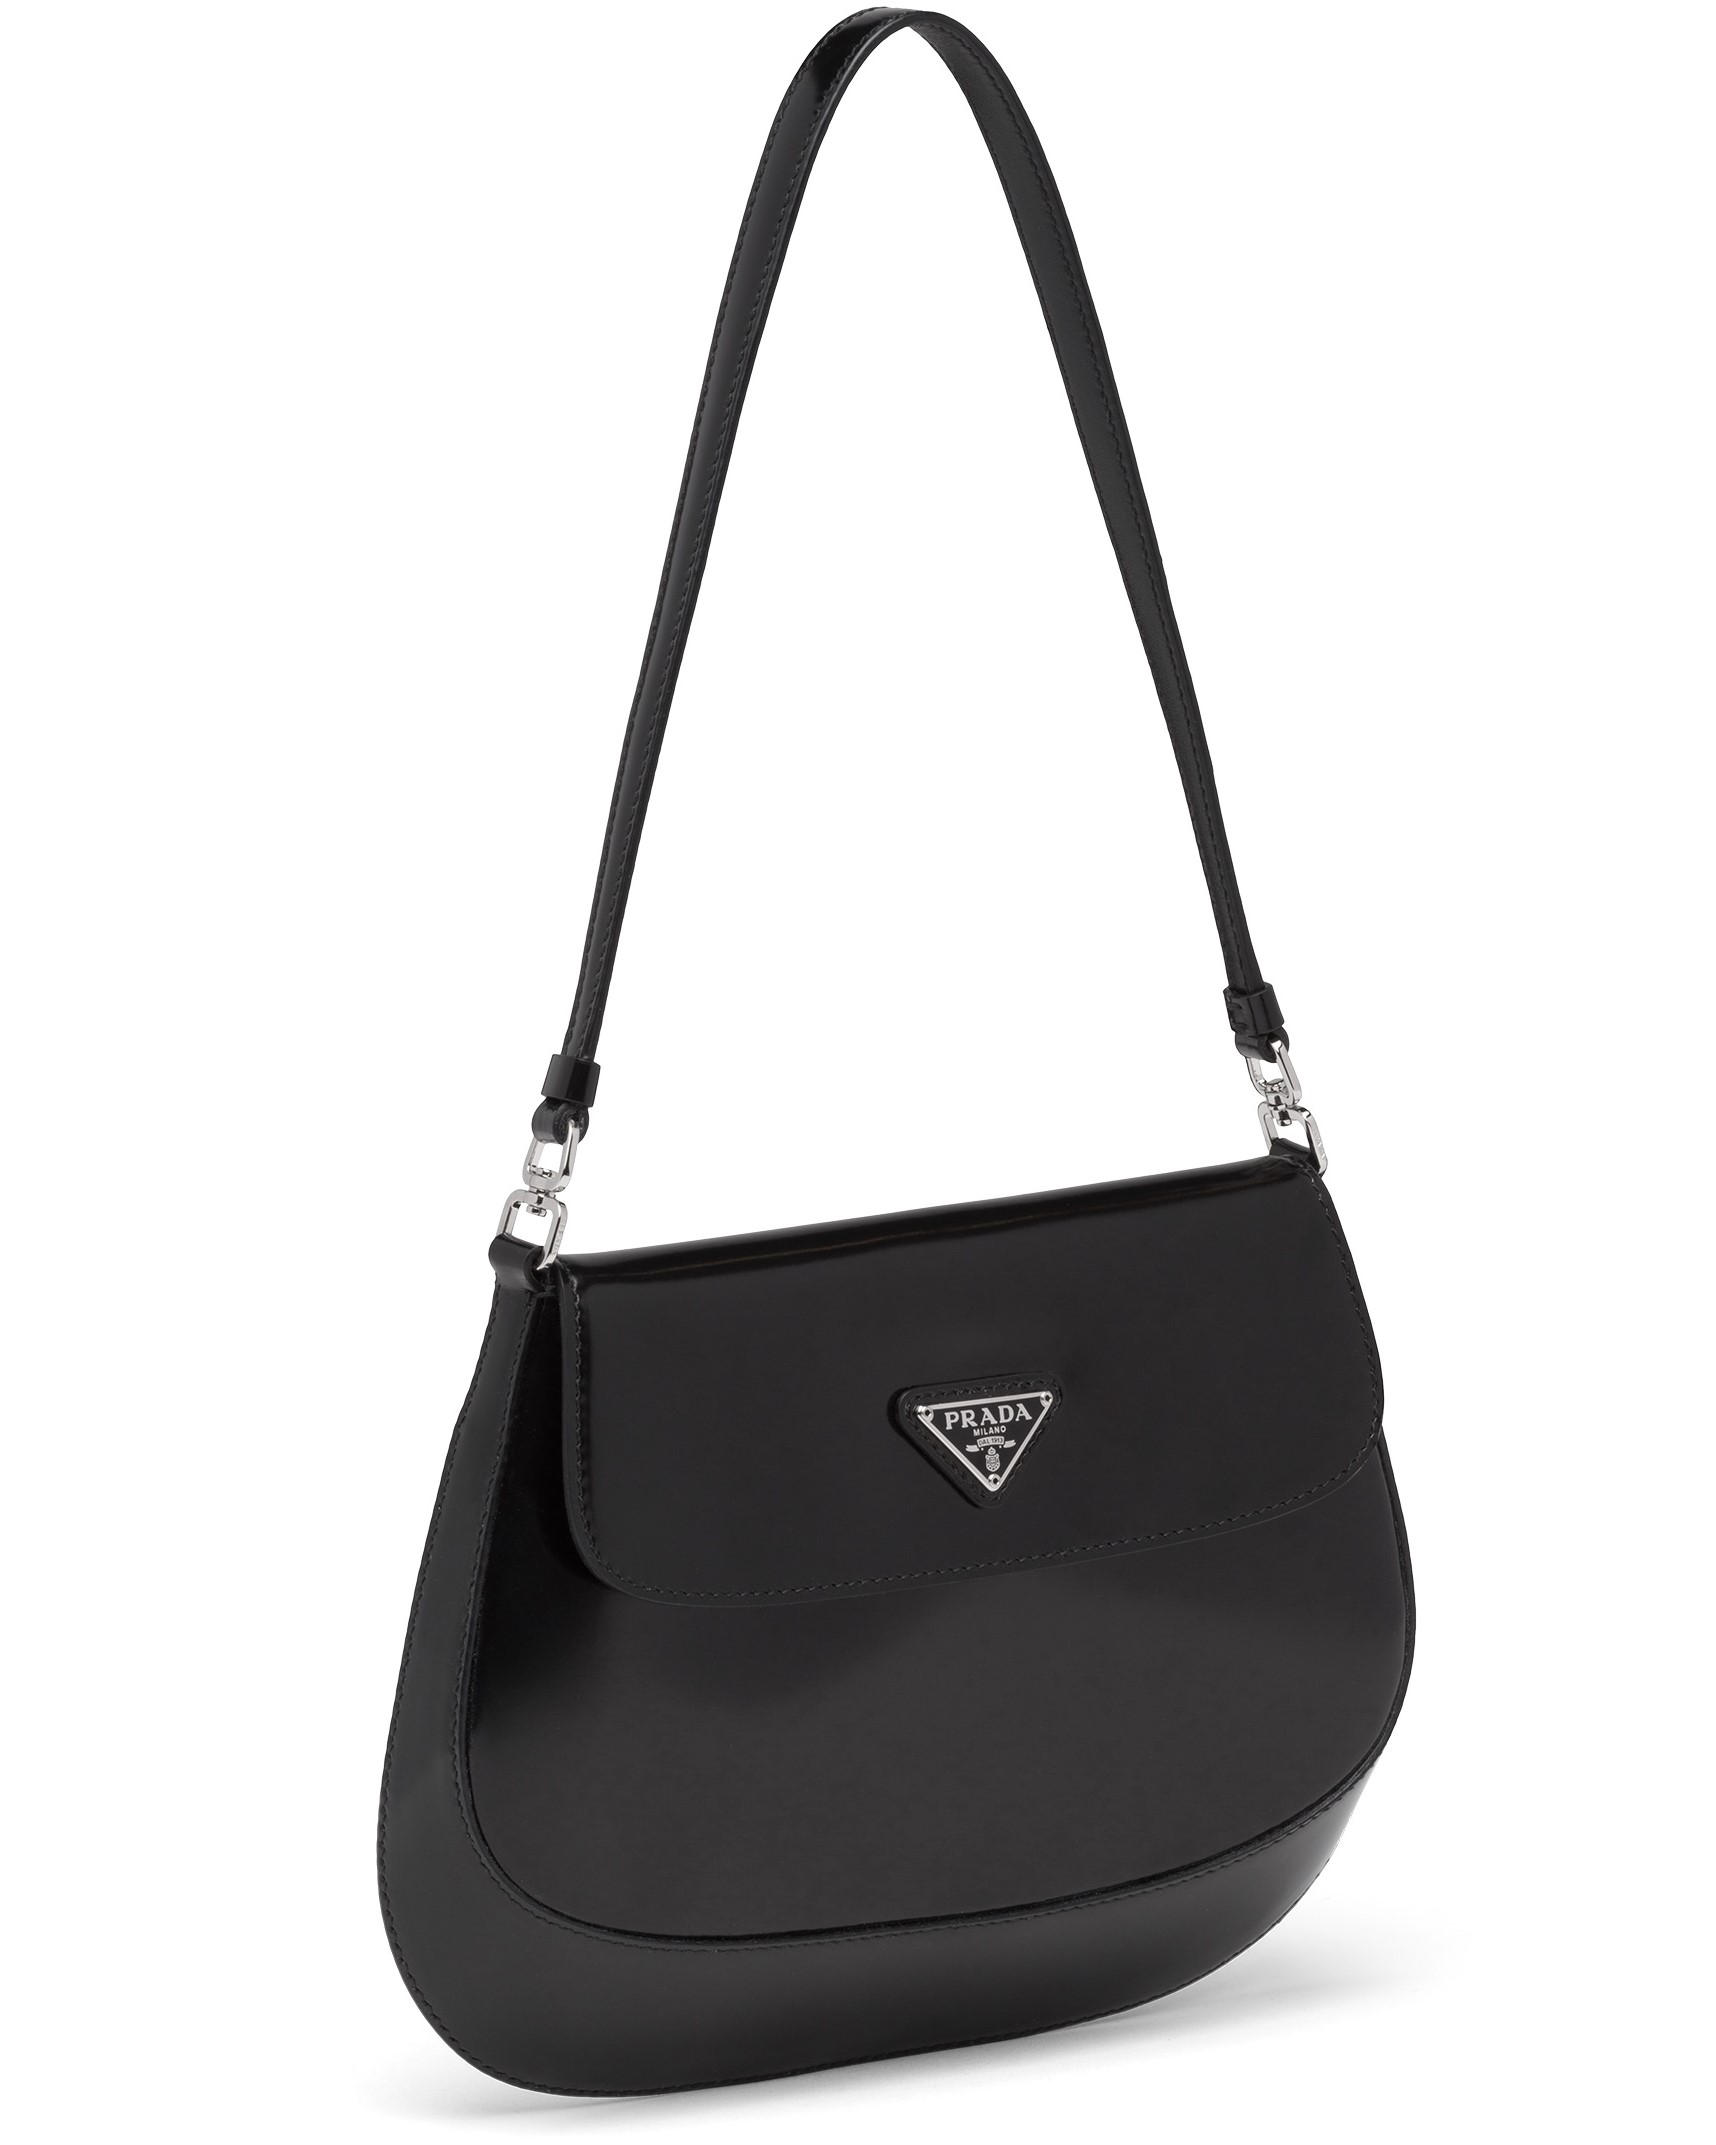 TÚI XÁCH PRADA CLEO BRUSHED LEATHER SHOULDER BAG WITH FLAP 14